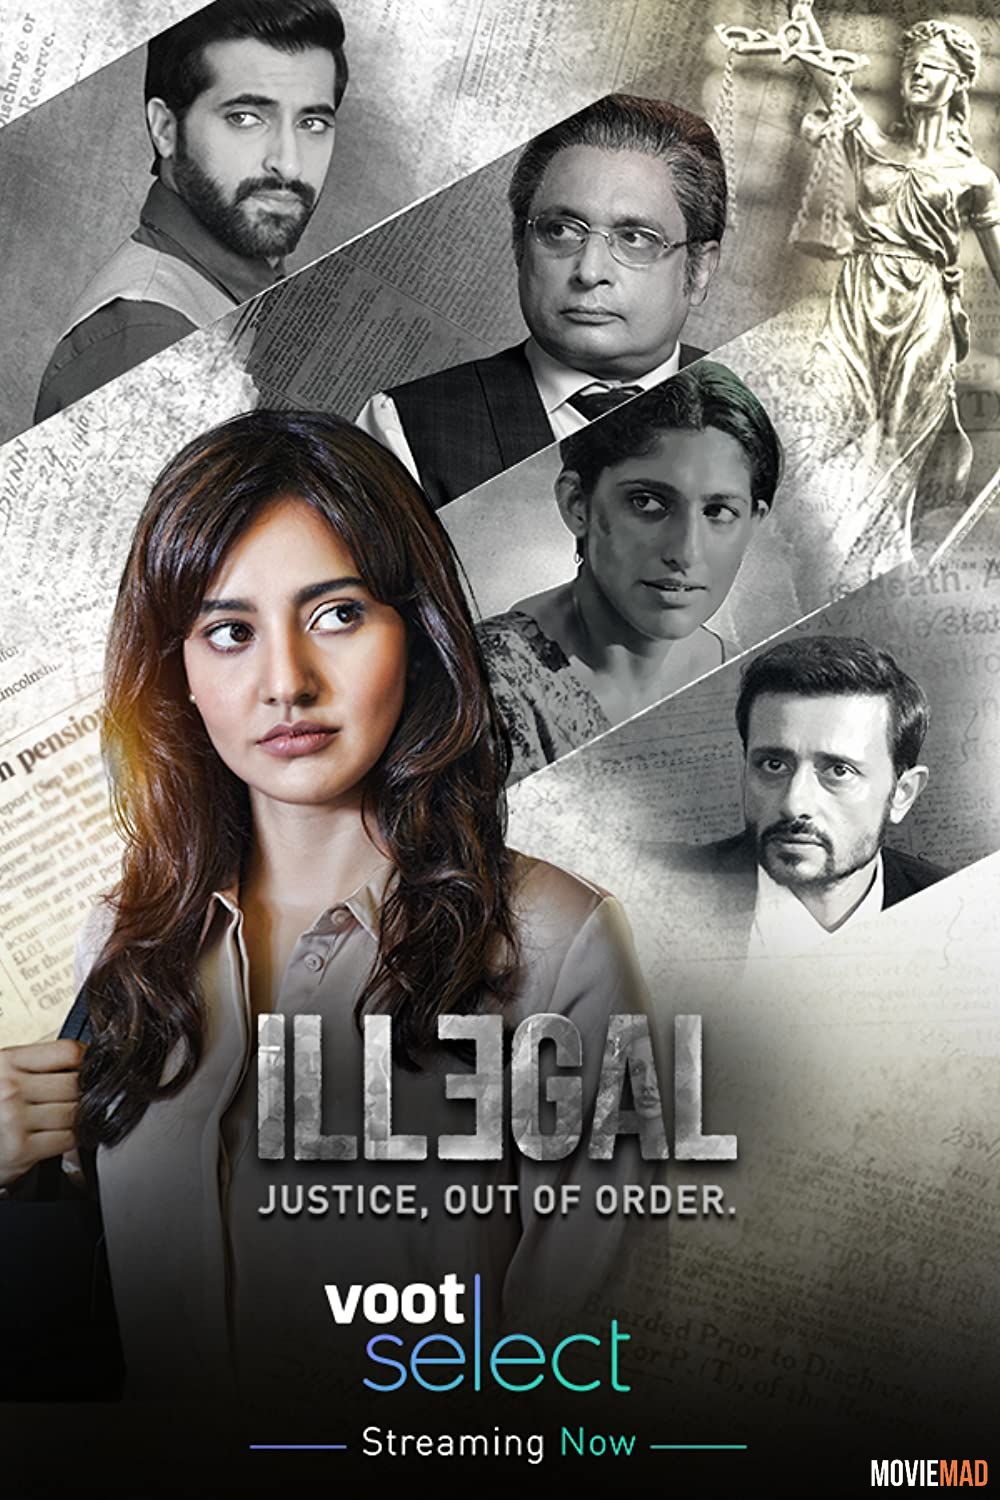 full moviesIllegal Justice Out of Order S02 2021 Hindi Complete Voot Select Original Web Series HDRip 1080p 720p 480p